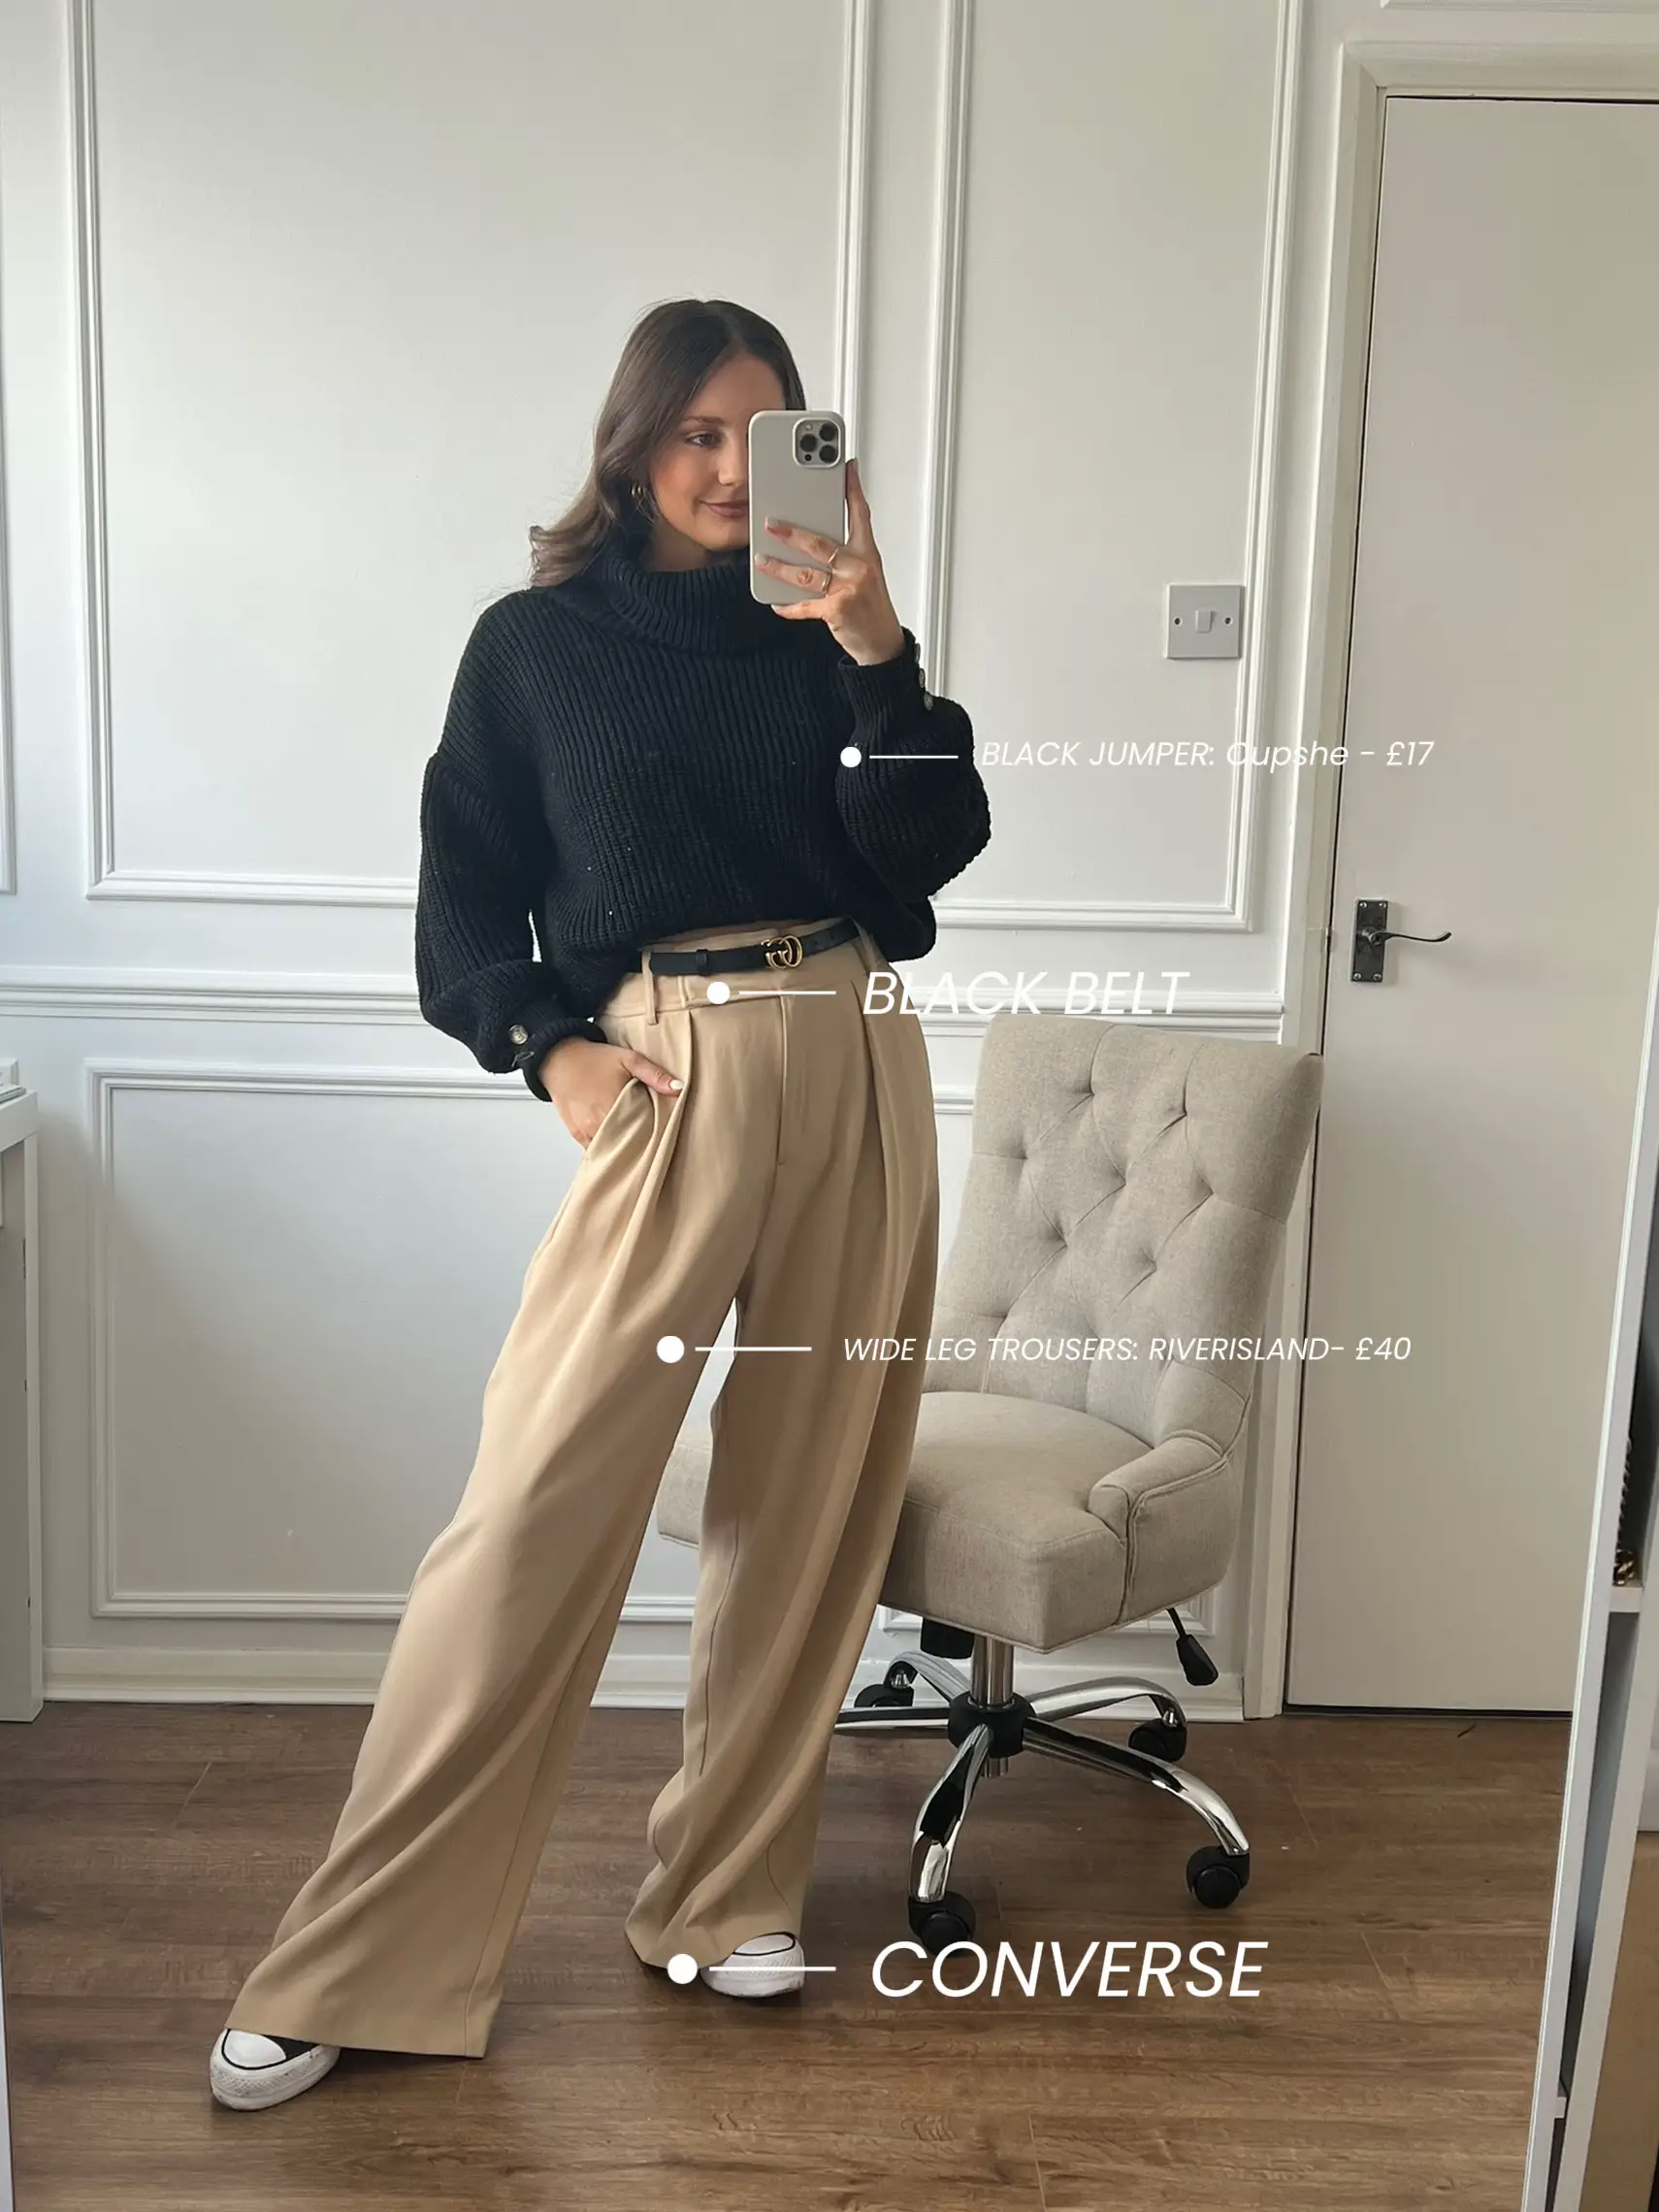 Neutral trouser outfits 🤍 1,2 or 3? // One of my favorite trouser